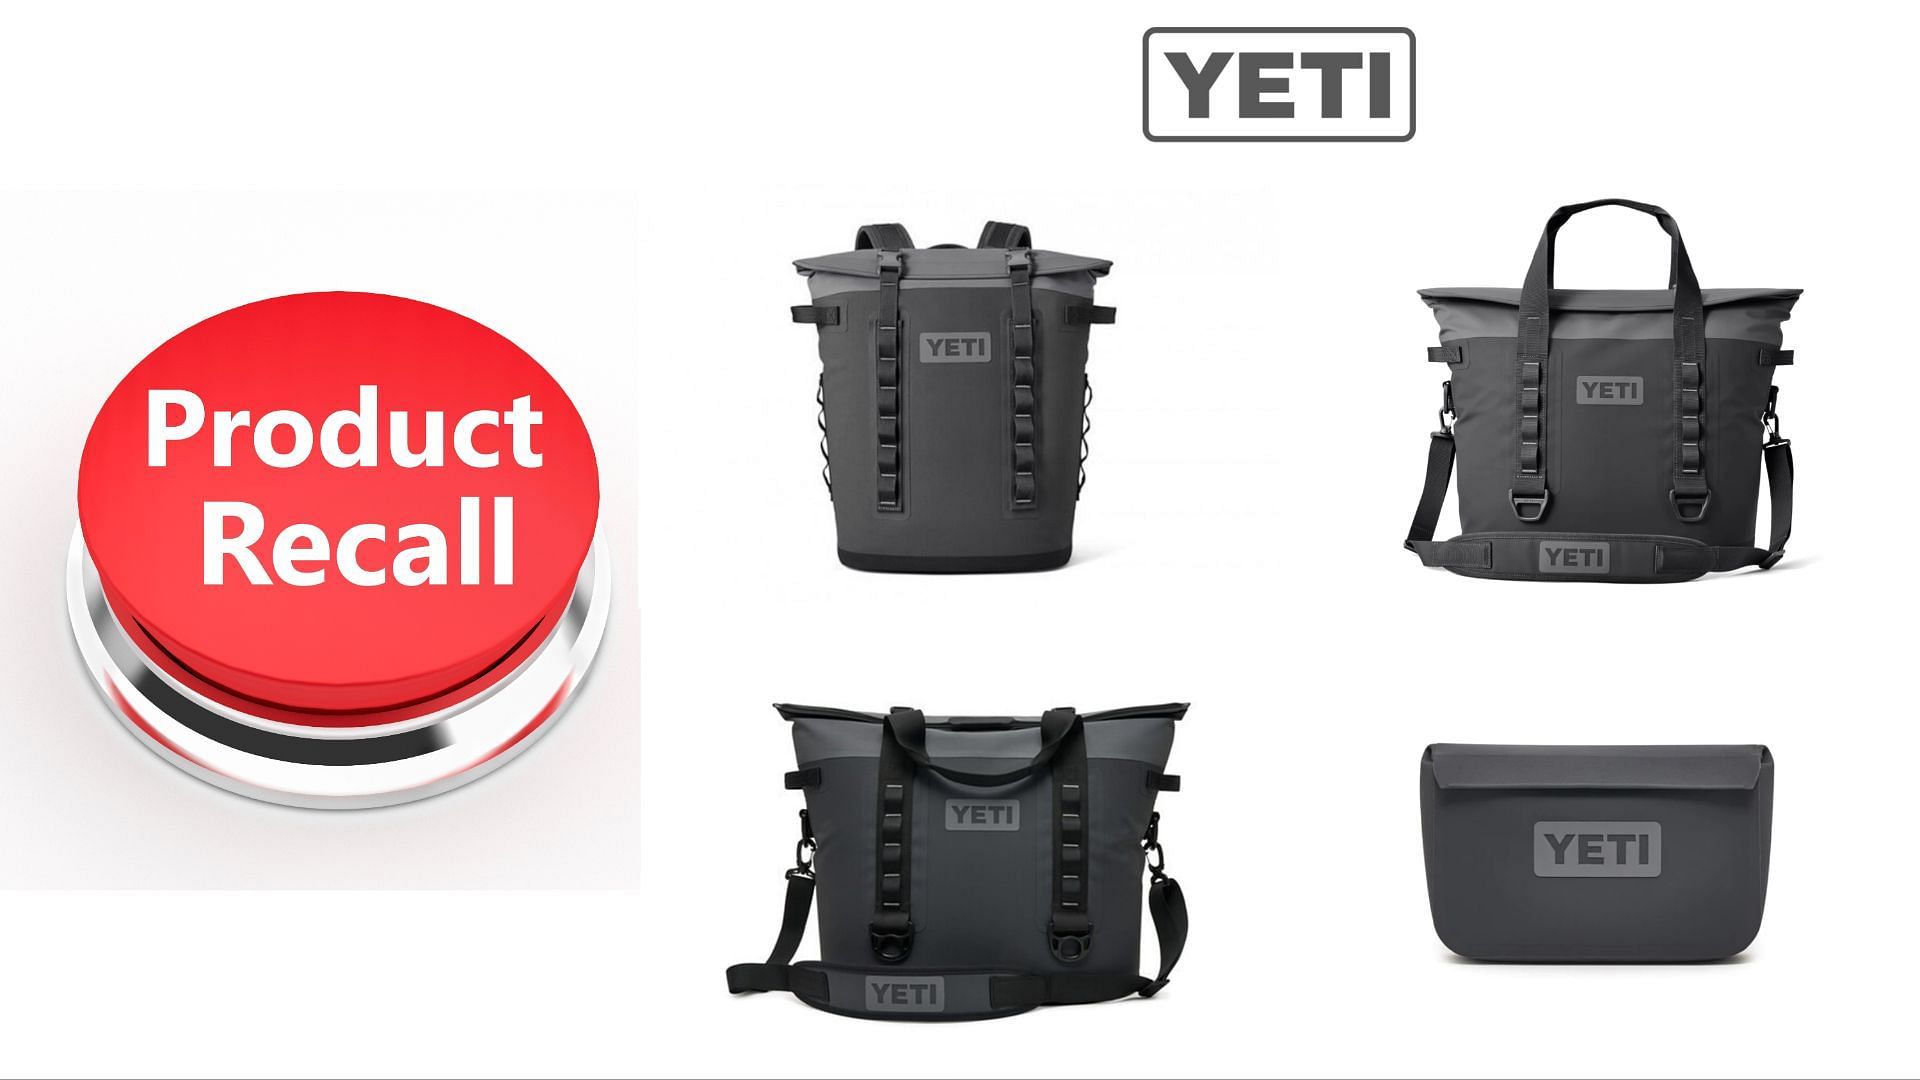 YETI Holdings, Inc. has issued a nationwide recall of nearly 2 million soft coolers and gear cases over Magnet Ingestion Hazard concerns (Image via CPSC/Health Canada)